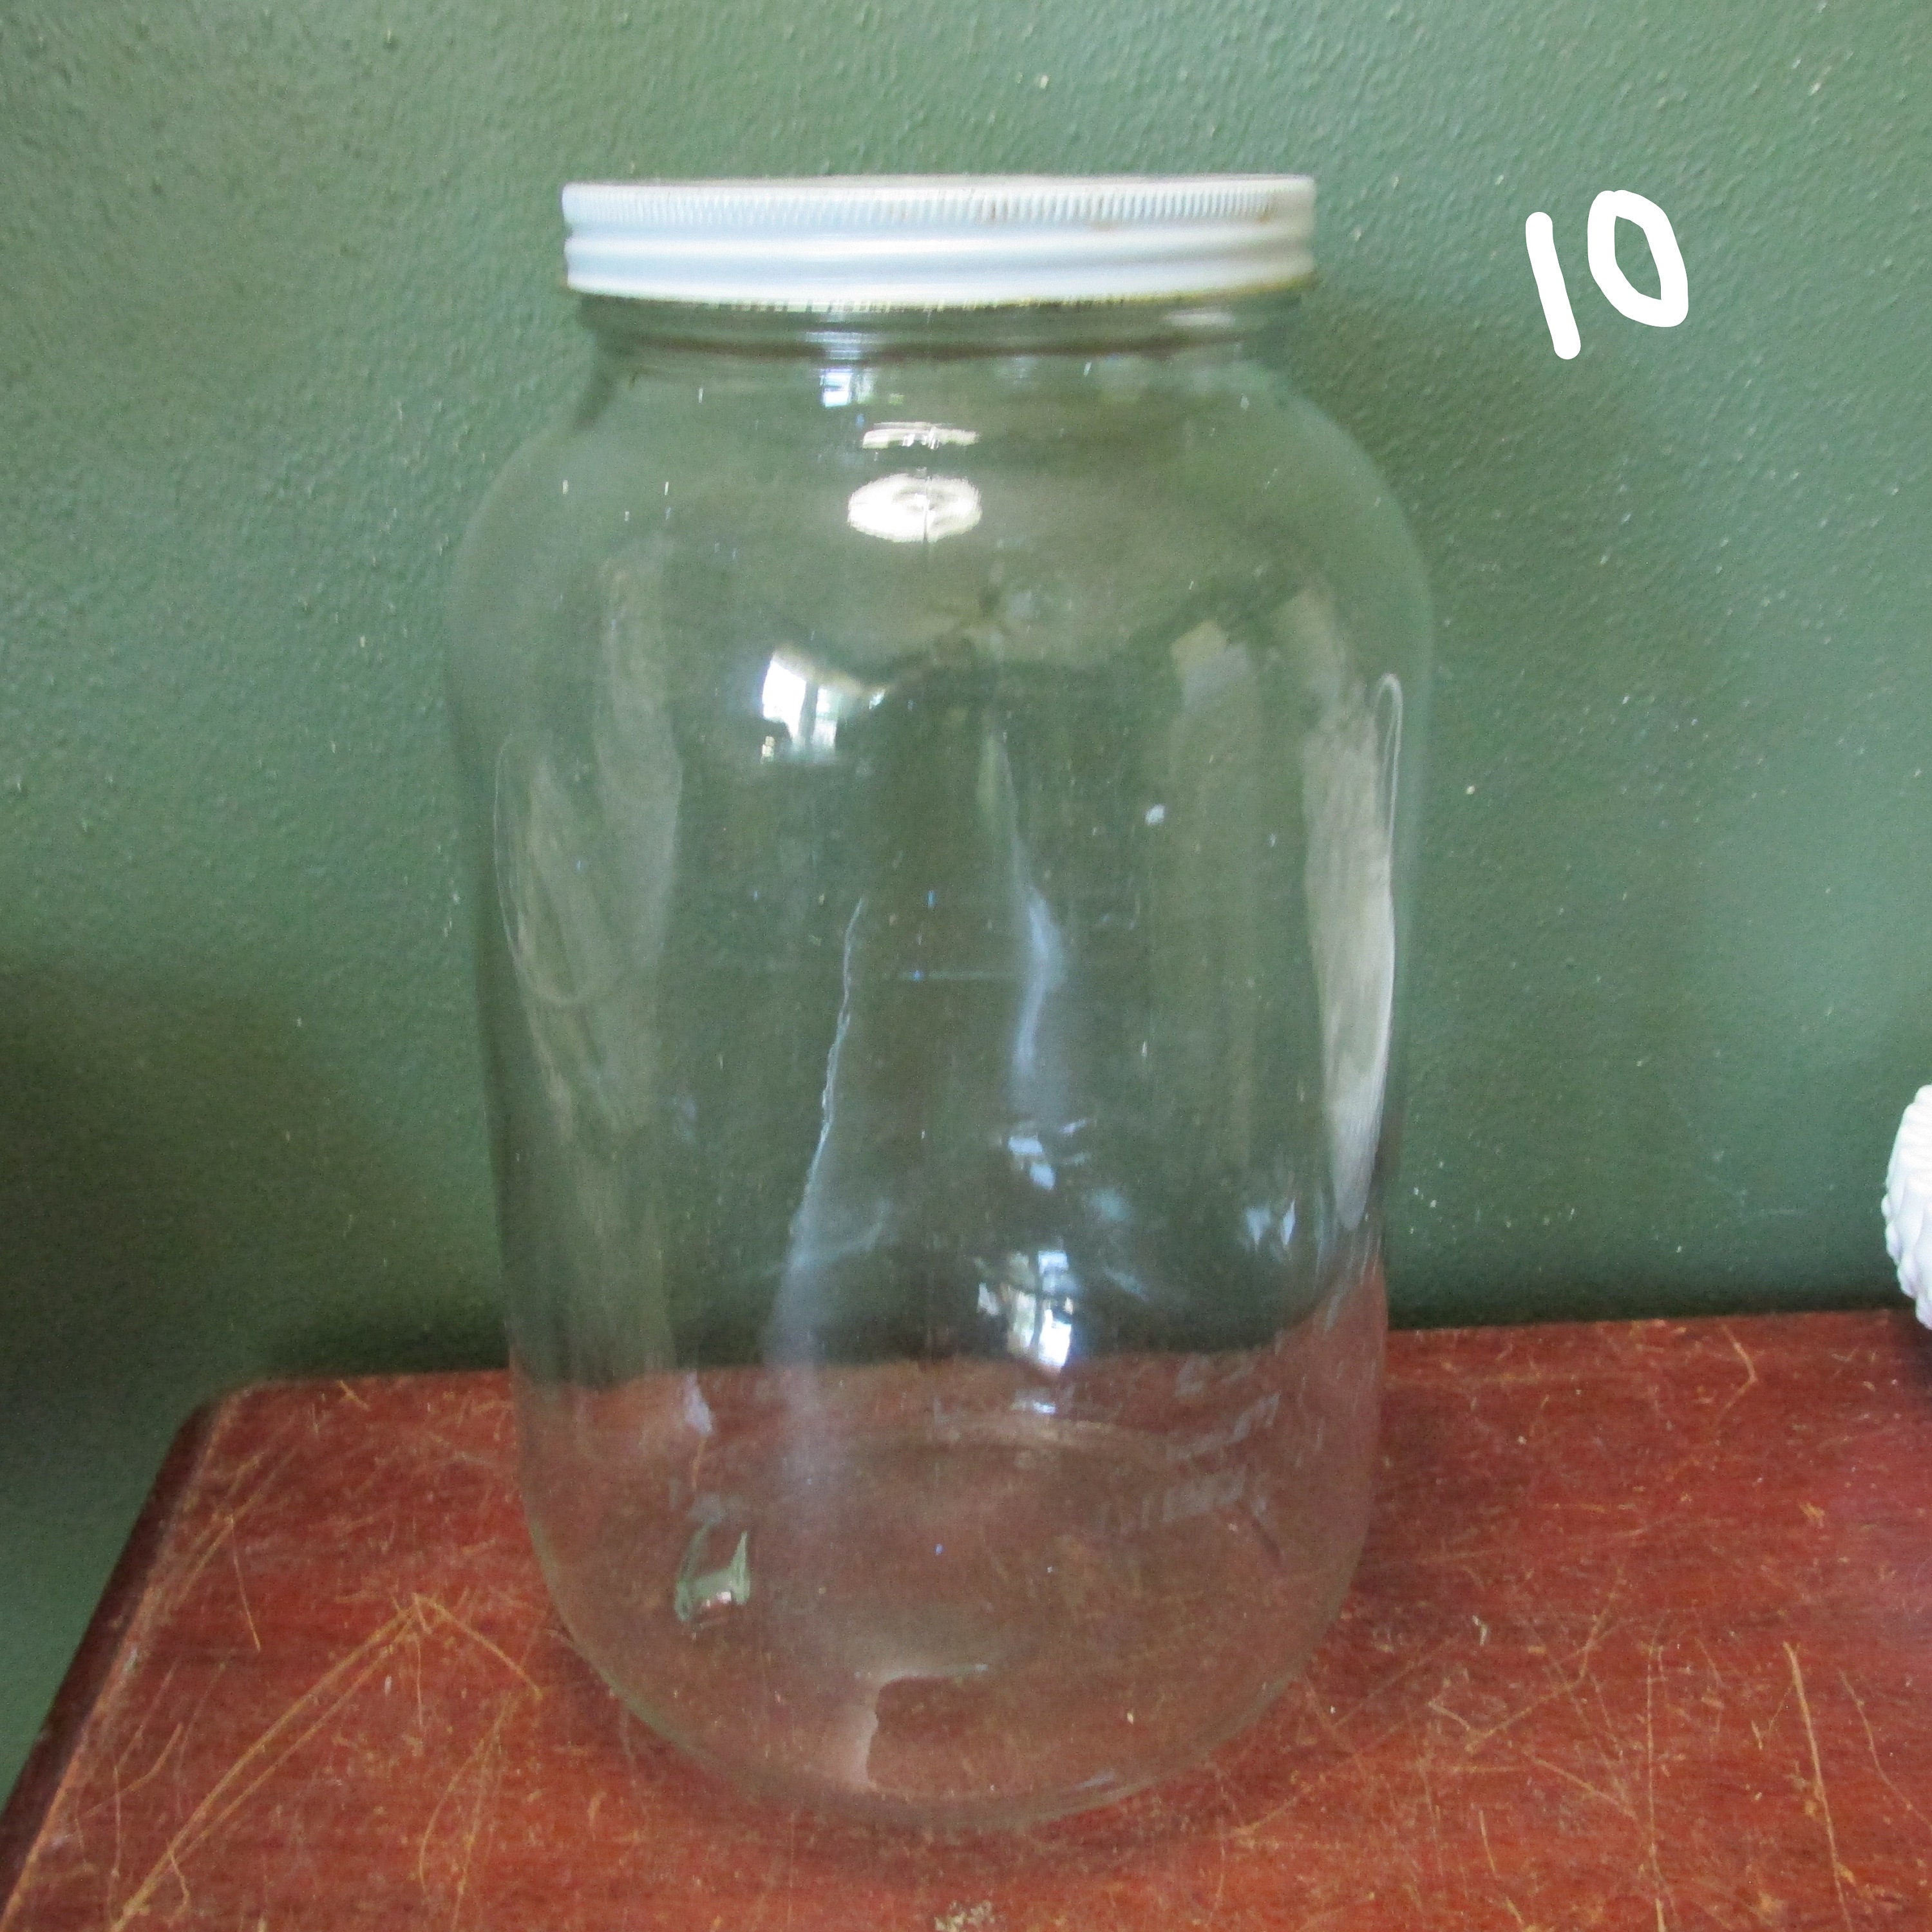 Glass Jar Metal Lid Choice of 1 Vintage Large Canister Containers